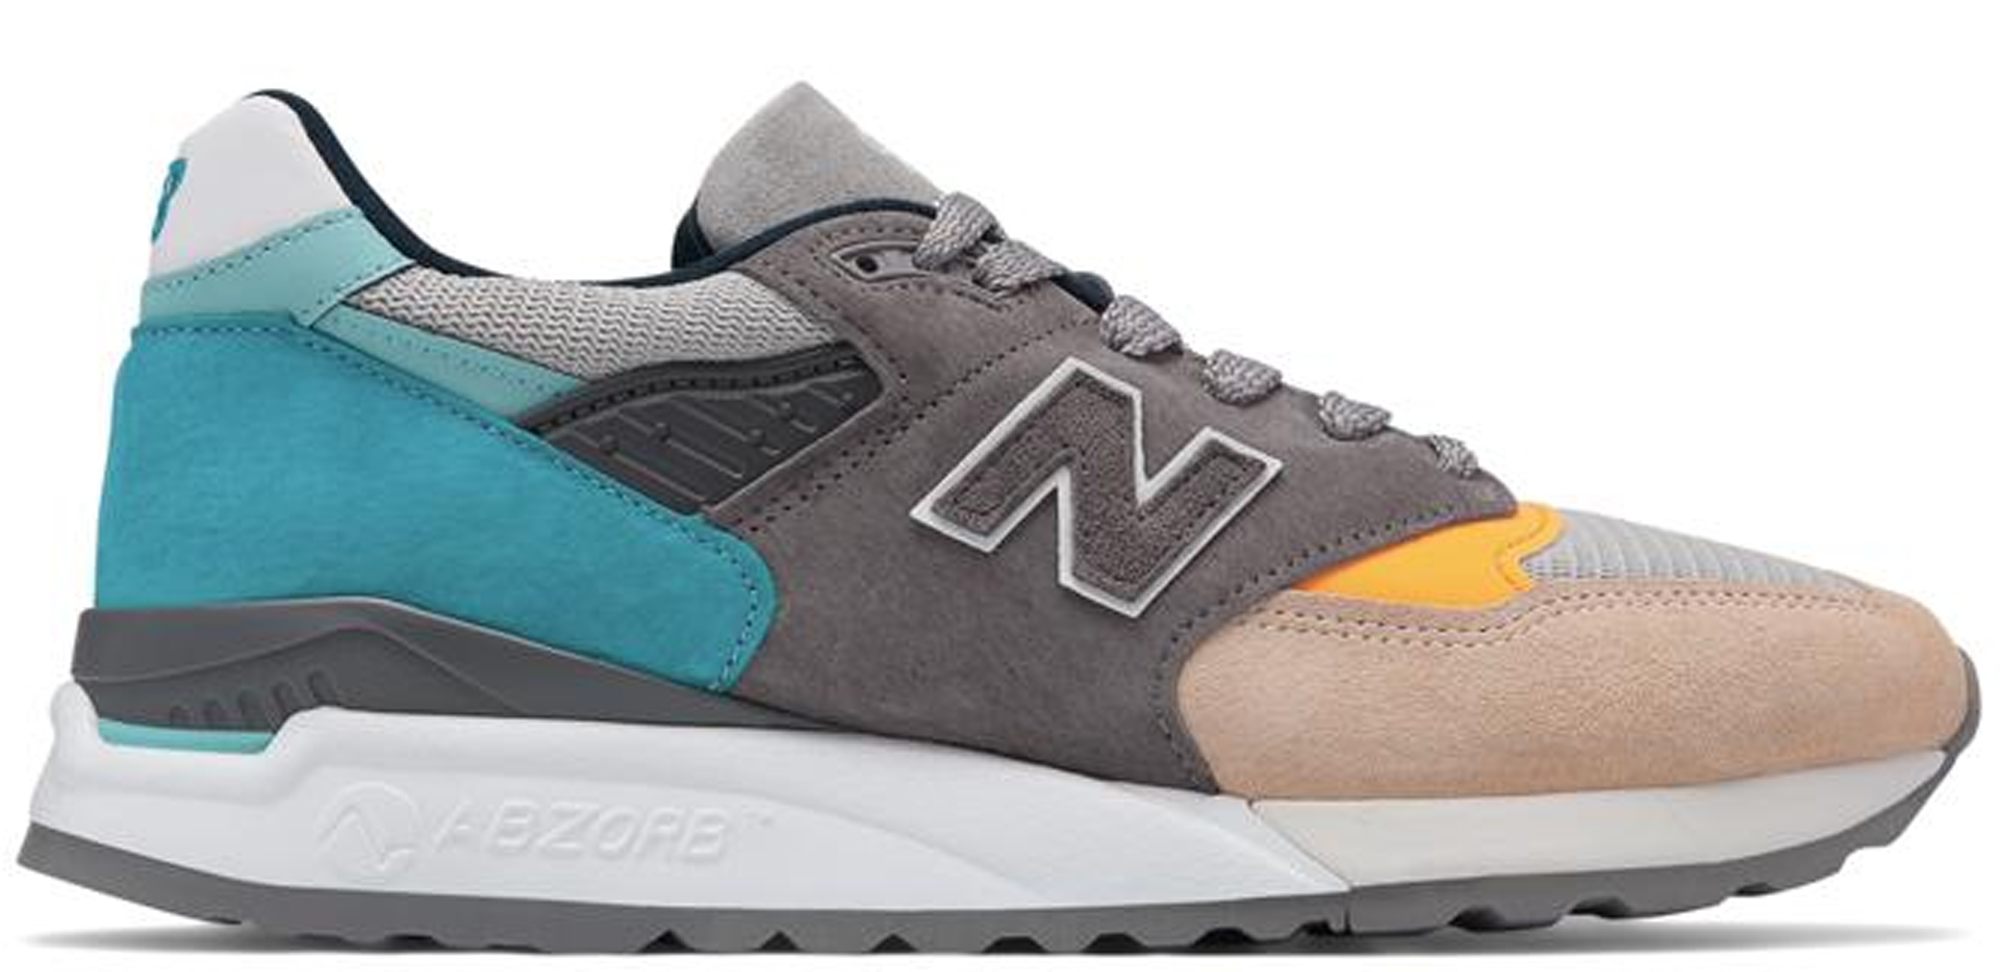 todd snyder x new balance 998 color spectrum